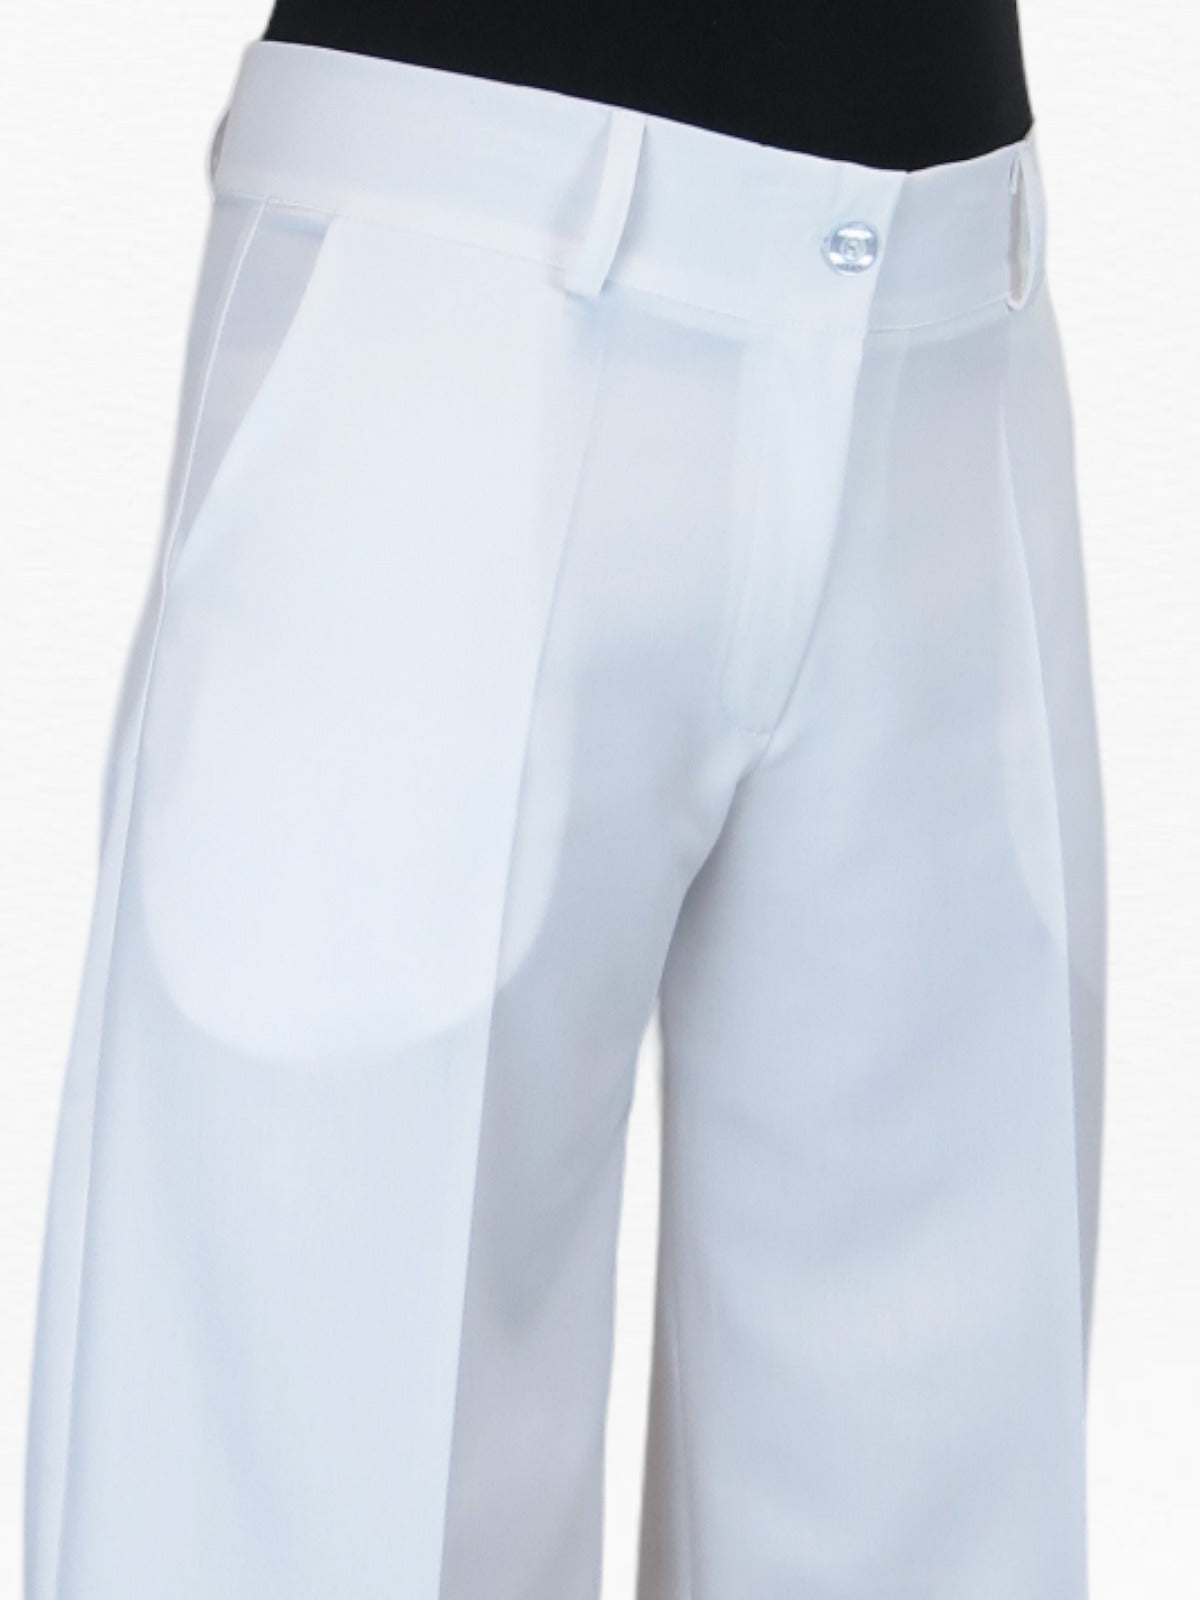 Ladies 3/4 Length Smart Culotte Trousers White